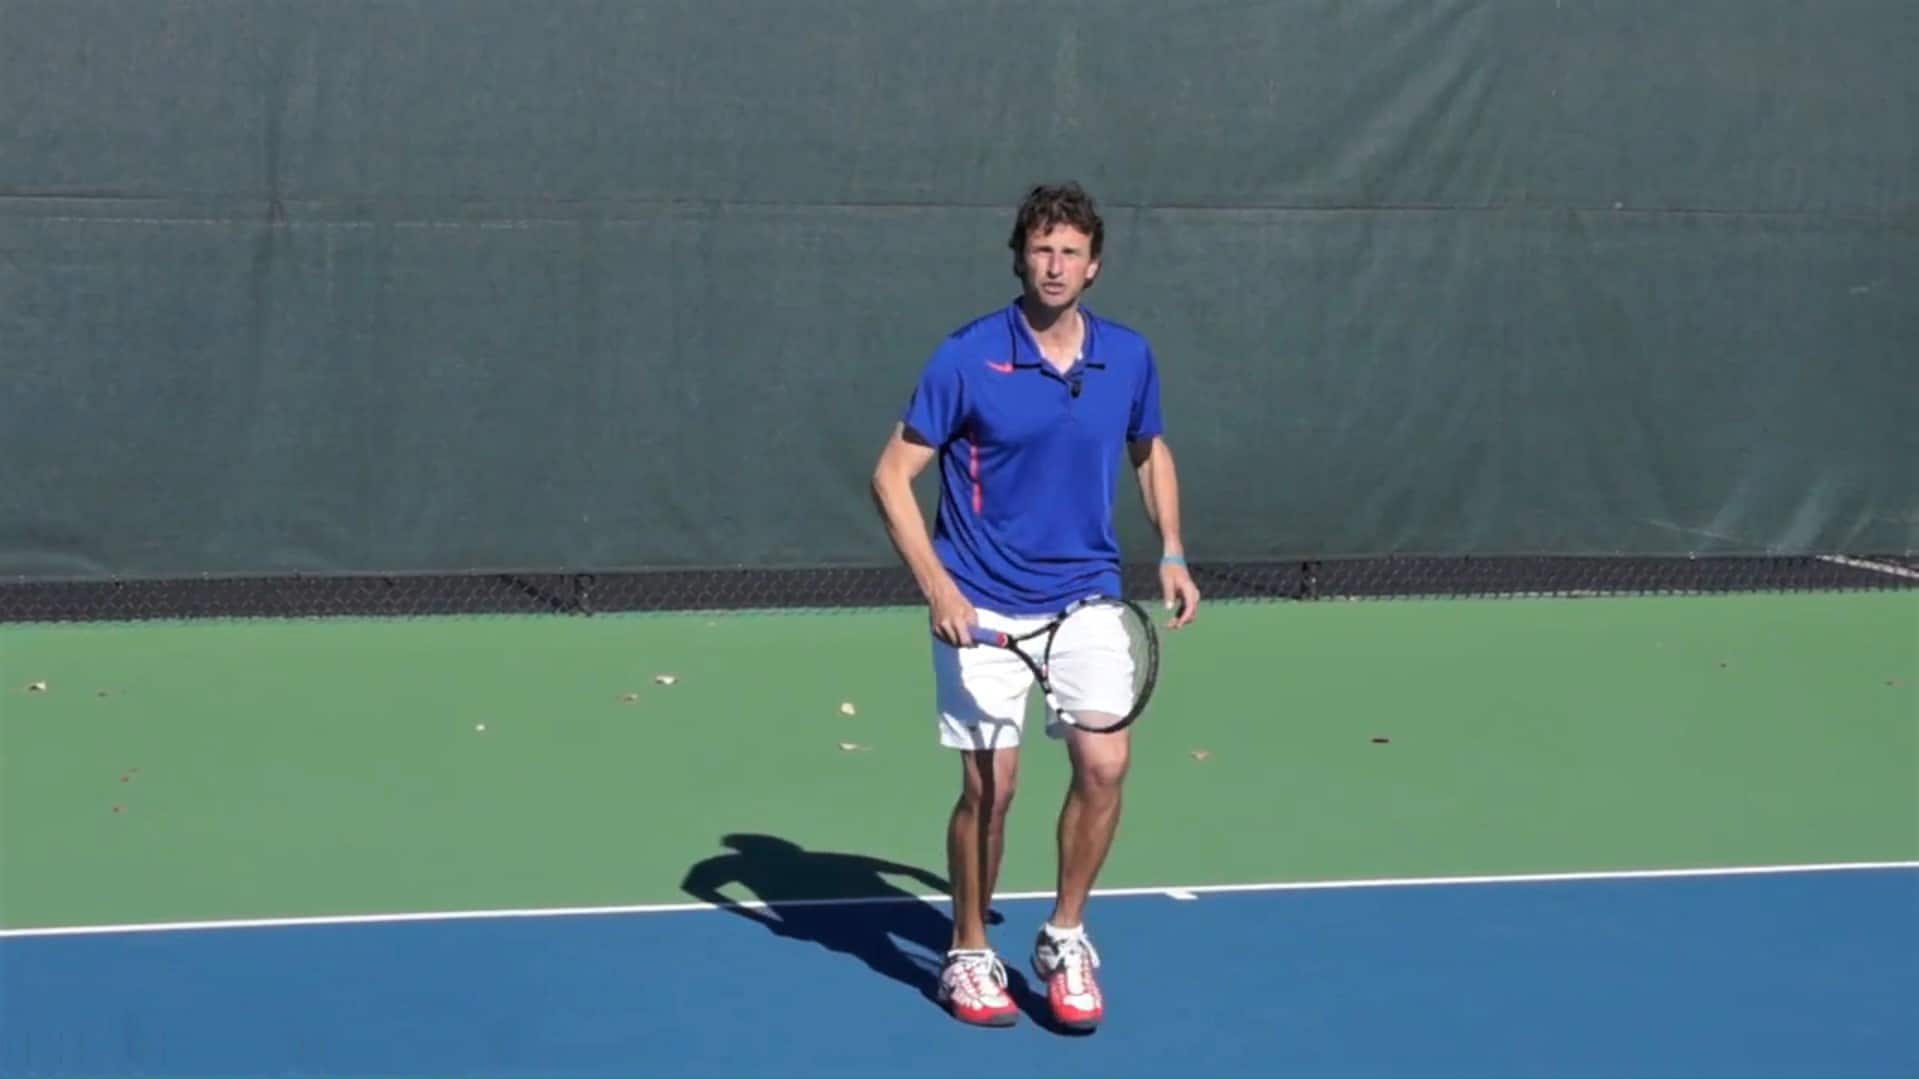 Jeff Salzenstein demonstrating incorrect serve and volley technique with short, tall steps.